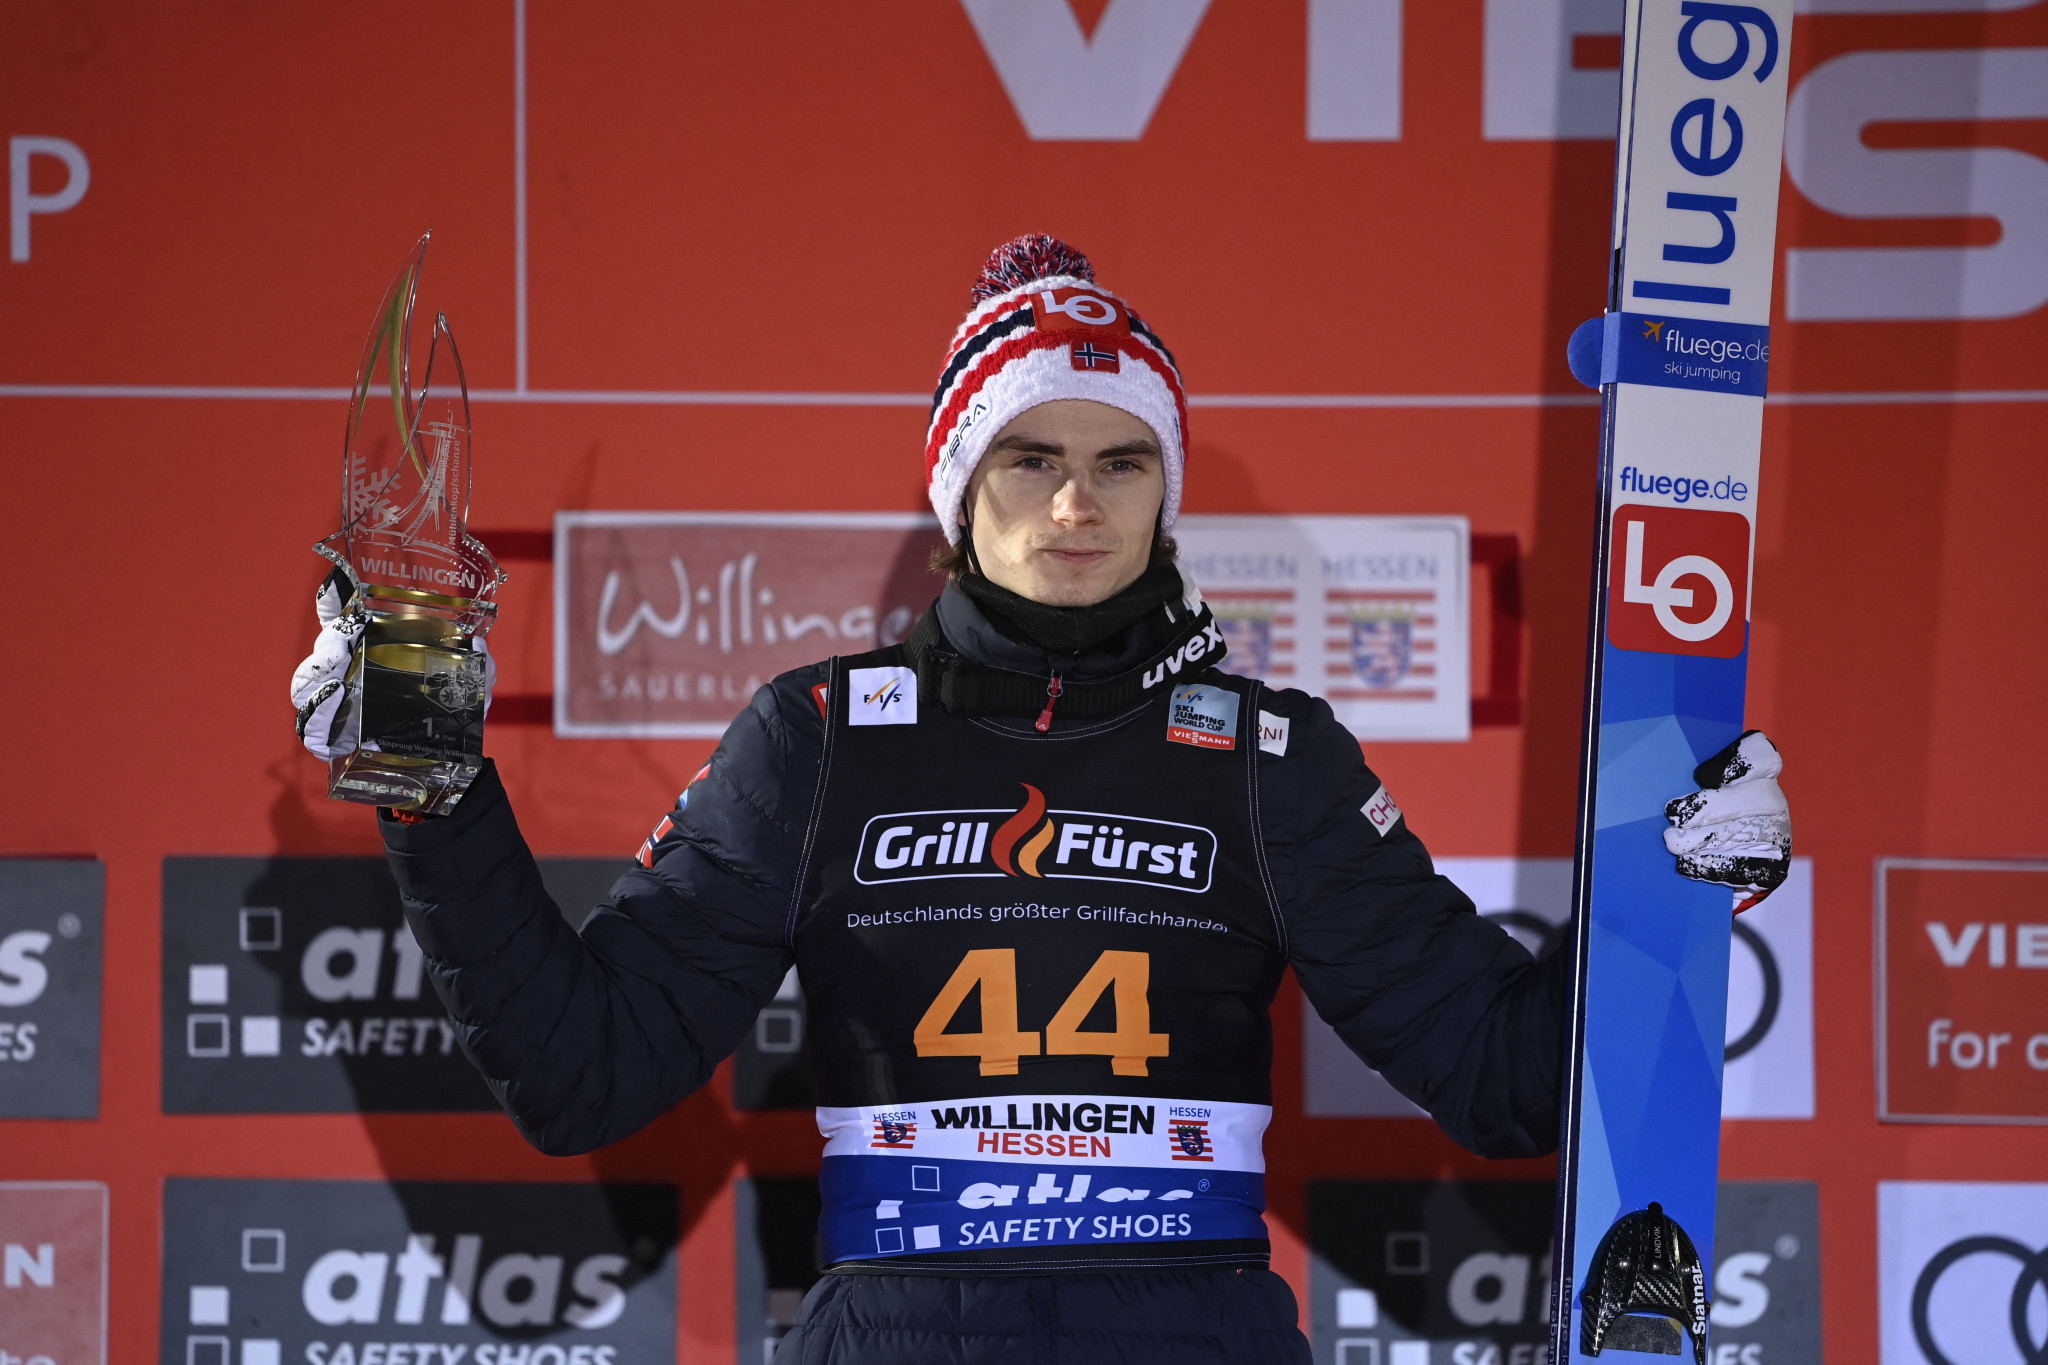 Lindvik wins Ski Jumping World Cup in Willingen while Geiger reclaims yellow bib